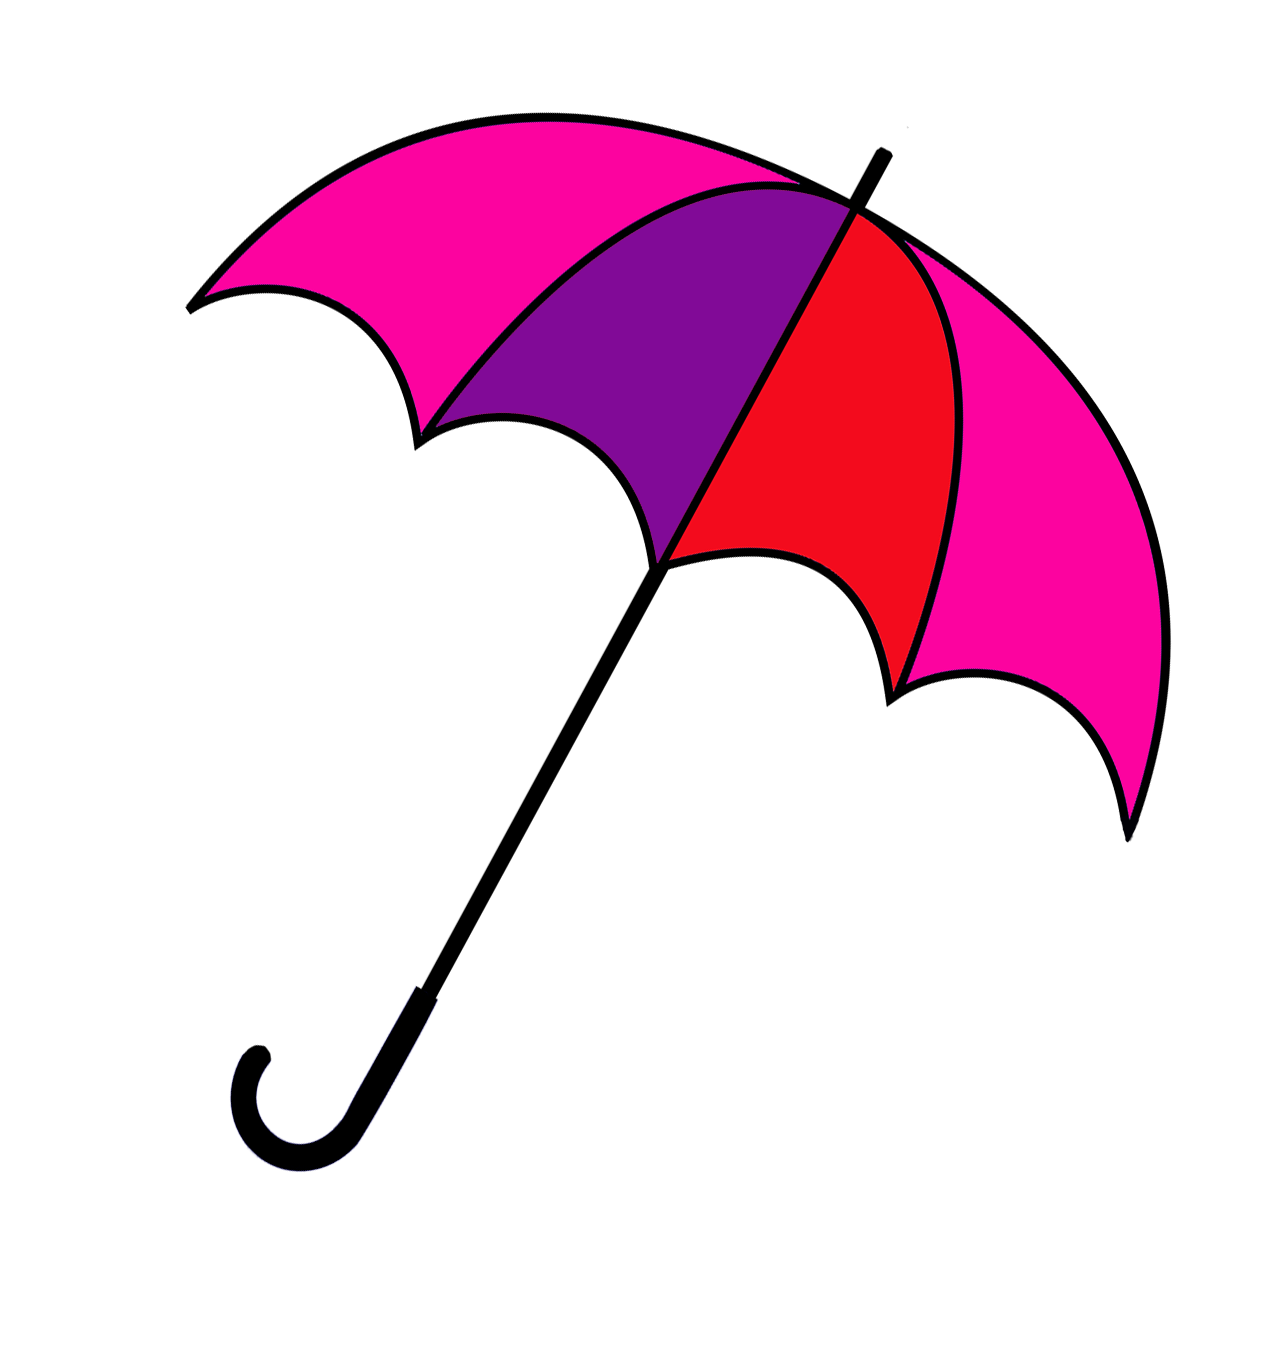 pink and red umbrella image